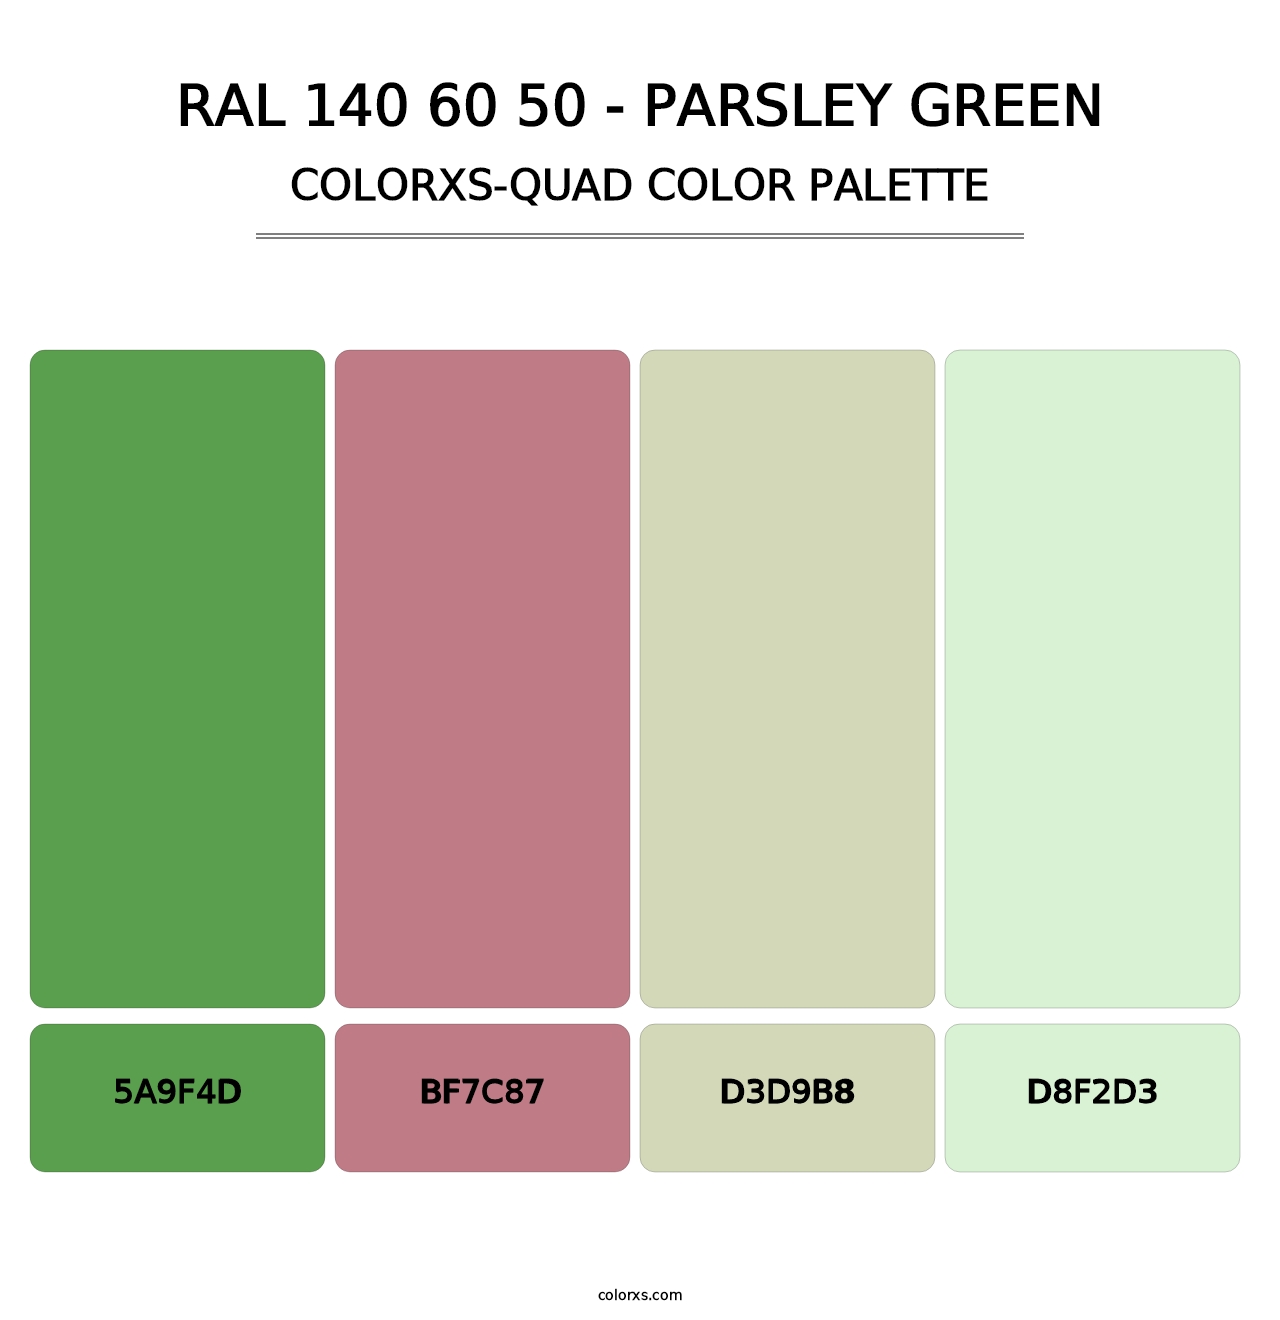 RAL 140 60 50 - Parsley Green - Colorxs Quad Palette